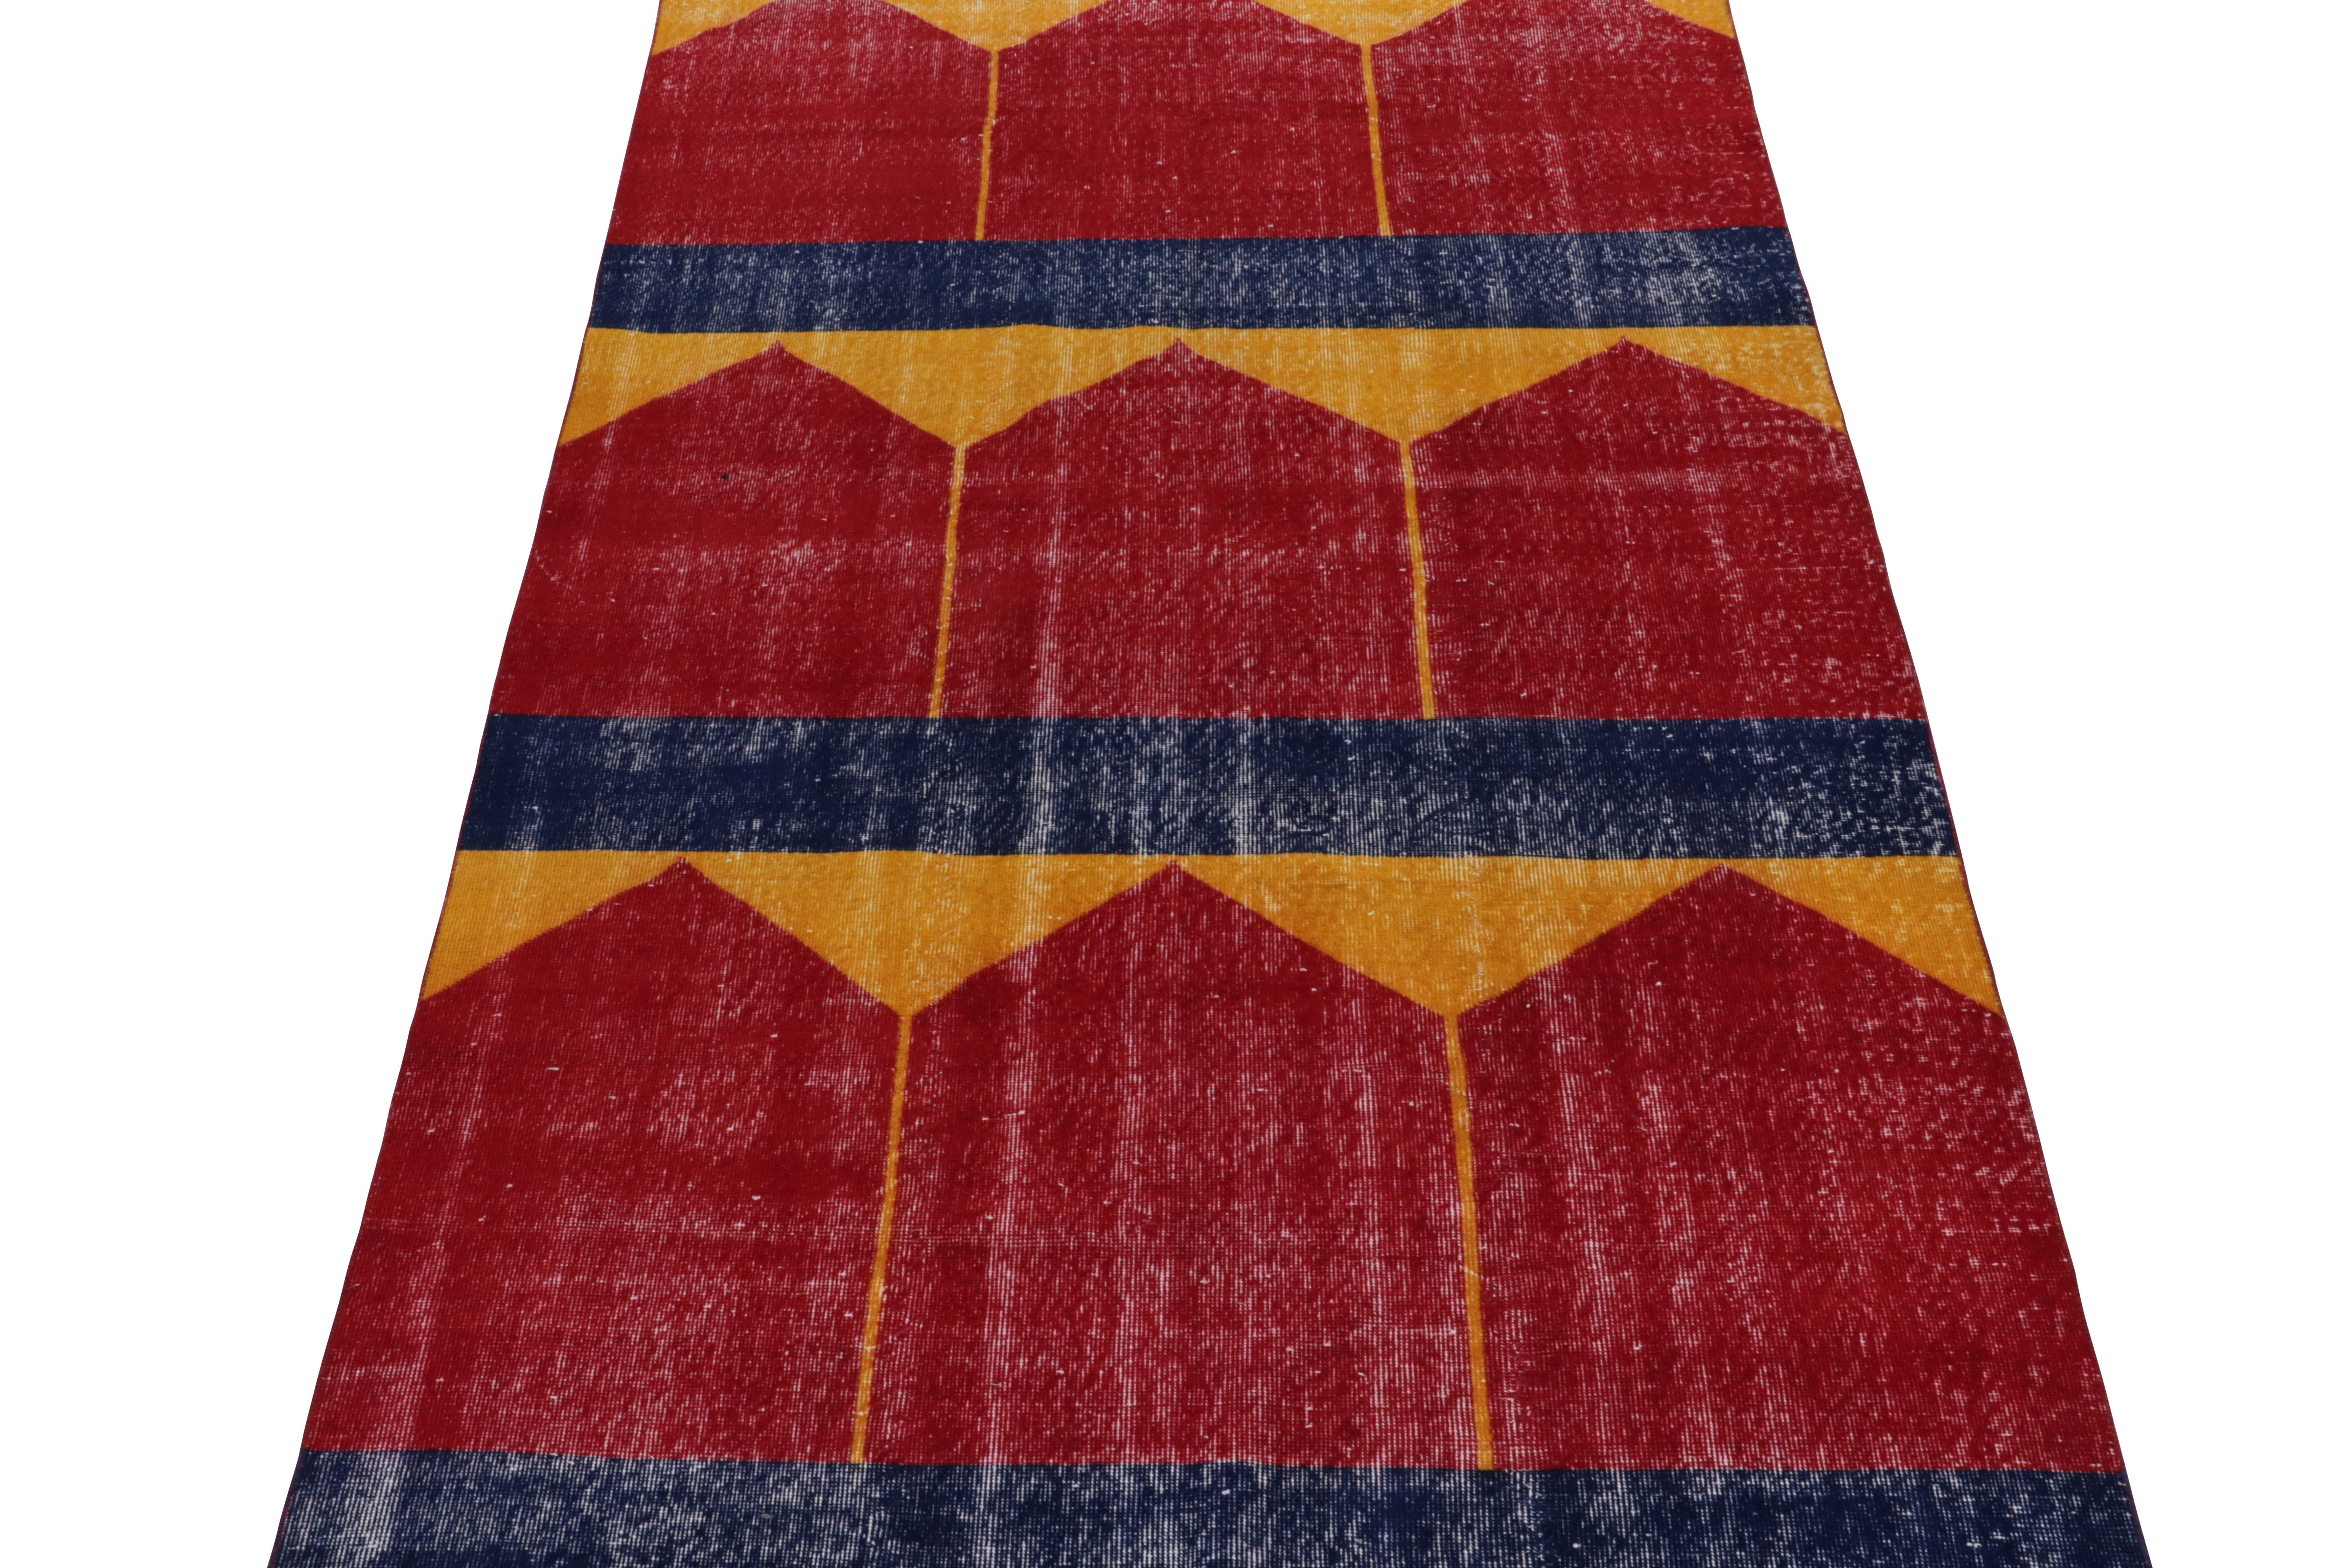 Hand-knotted in wool, a 6x10 vintage rug from a revered Turkish atelier, entering Rug & Kilim’s commemorative Mid-Century Pasha Collection.

This dedicated piece enjoys mid-century aesthetics with geometric patterns in deep red, blue, and gold—all